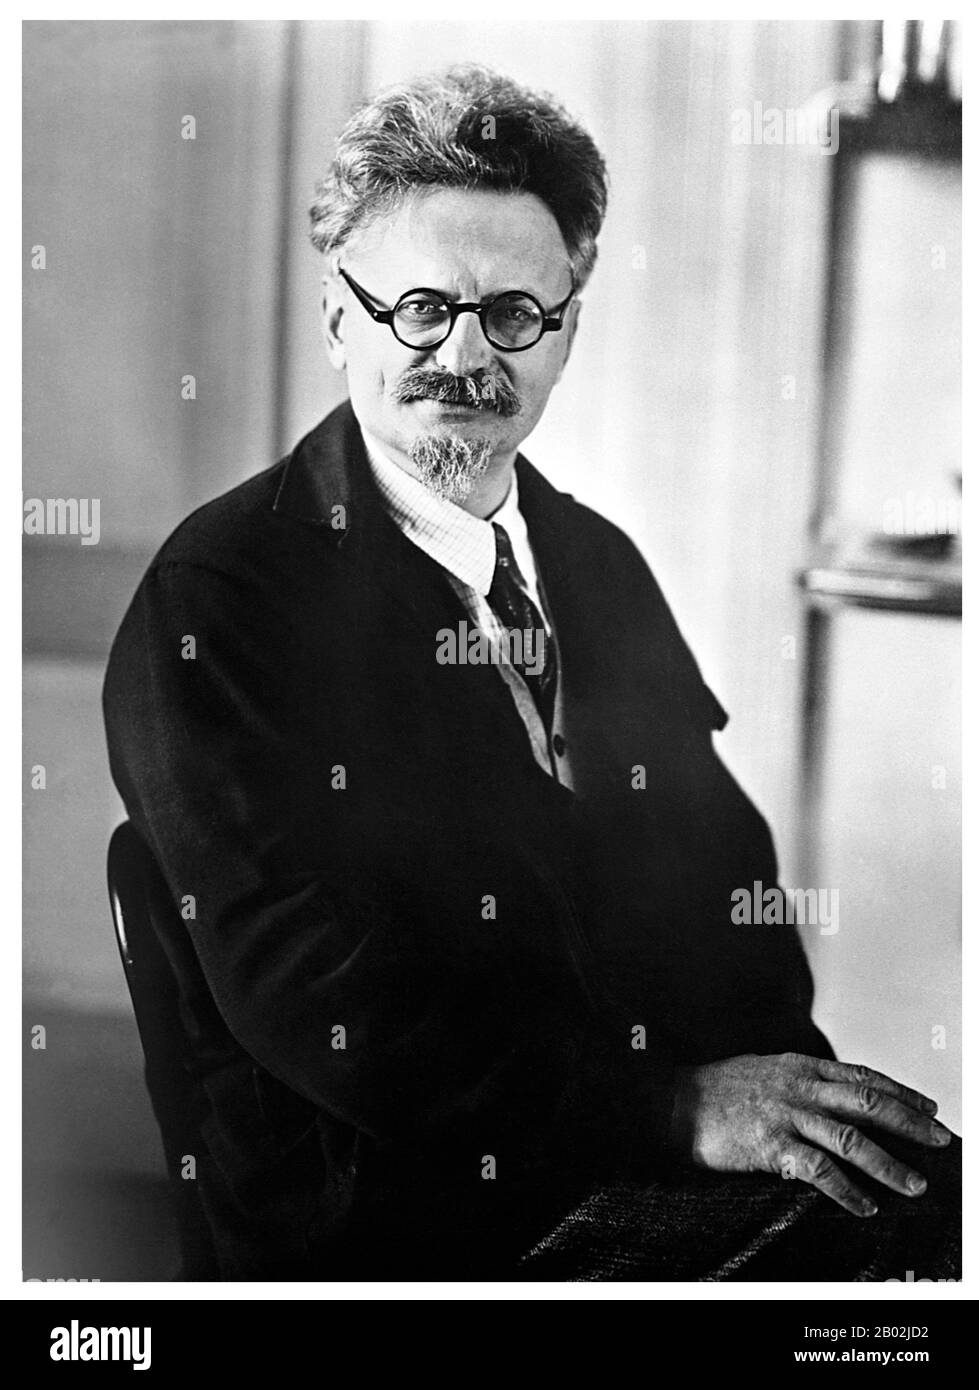 Leon Trotsky (Russian: Лев Дави́дович Тро́цкий; born Lev Davidovich Bronshtein (7 November 1879 – 21 August 1940) was a Russian Marxist revolutionary and theorist, Soviet politician, and the founder and first leader of the Red Army.  Trotsky was initially a supporter of the Menshevik Internationalists faction of the Russian Social Democratic Labour Party. He joined the Bolsheviks immediately prior to the 1917 October Revolution, and eventually became a leader within the Party. During the early days of the Soviet Union, he served first as People's Commissar for Foreign Affairs and later as the Stock Photo